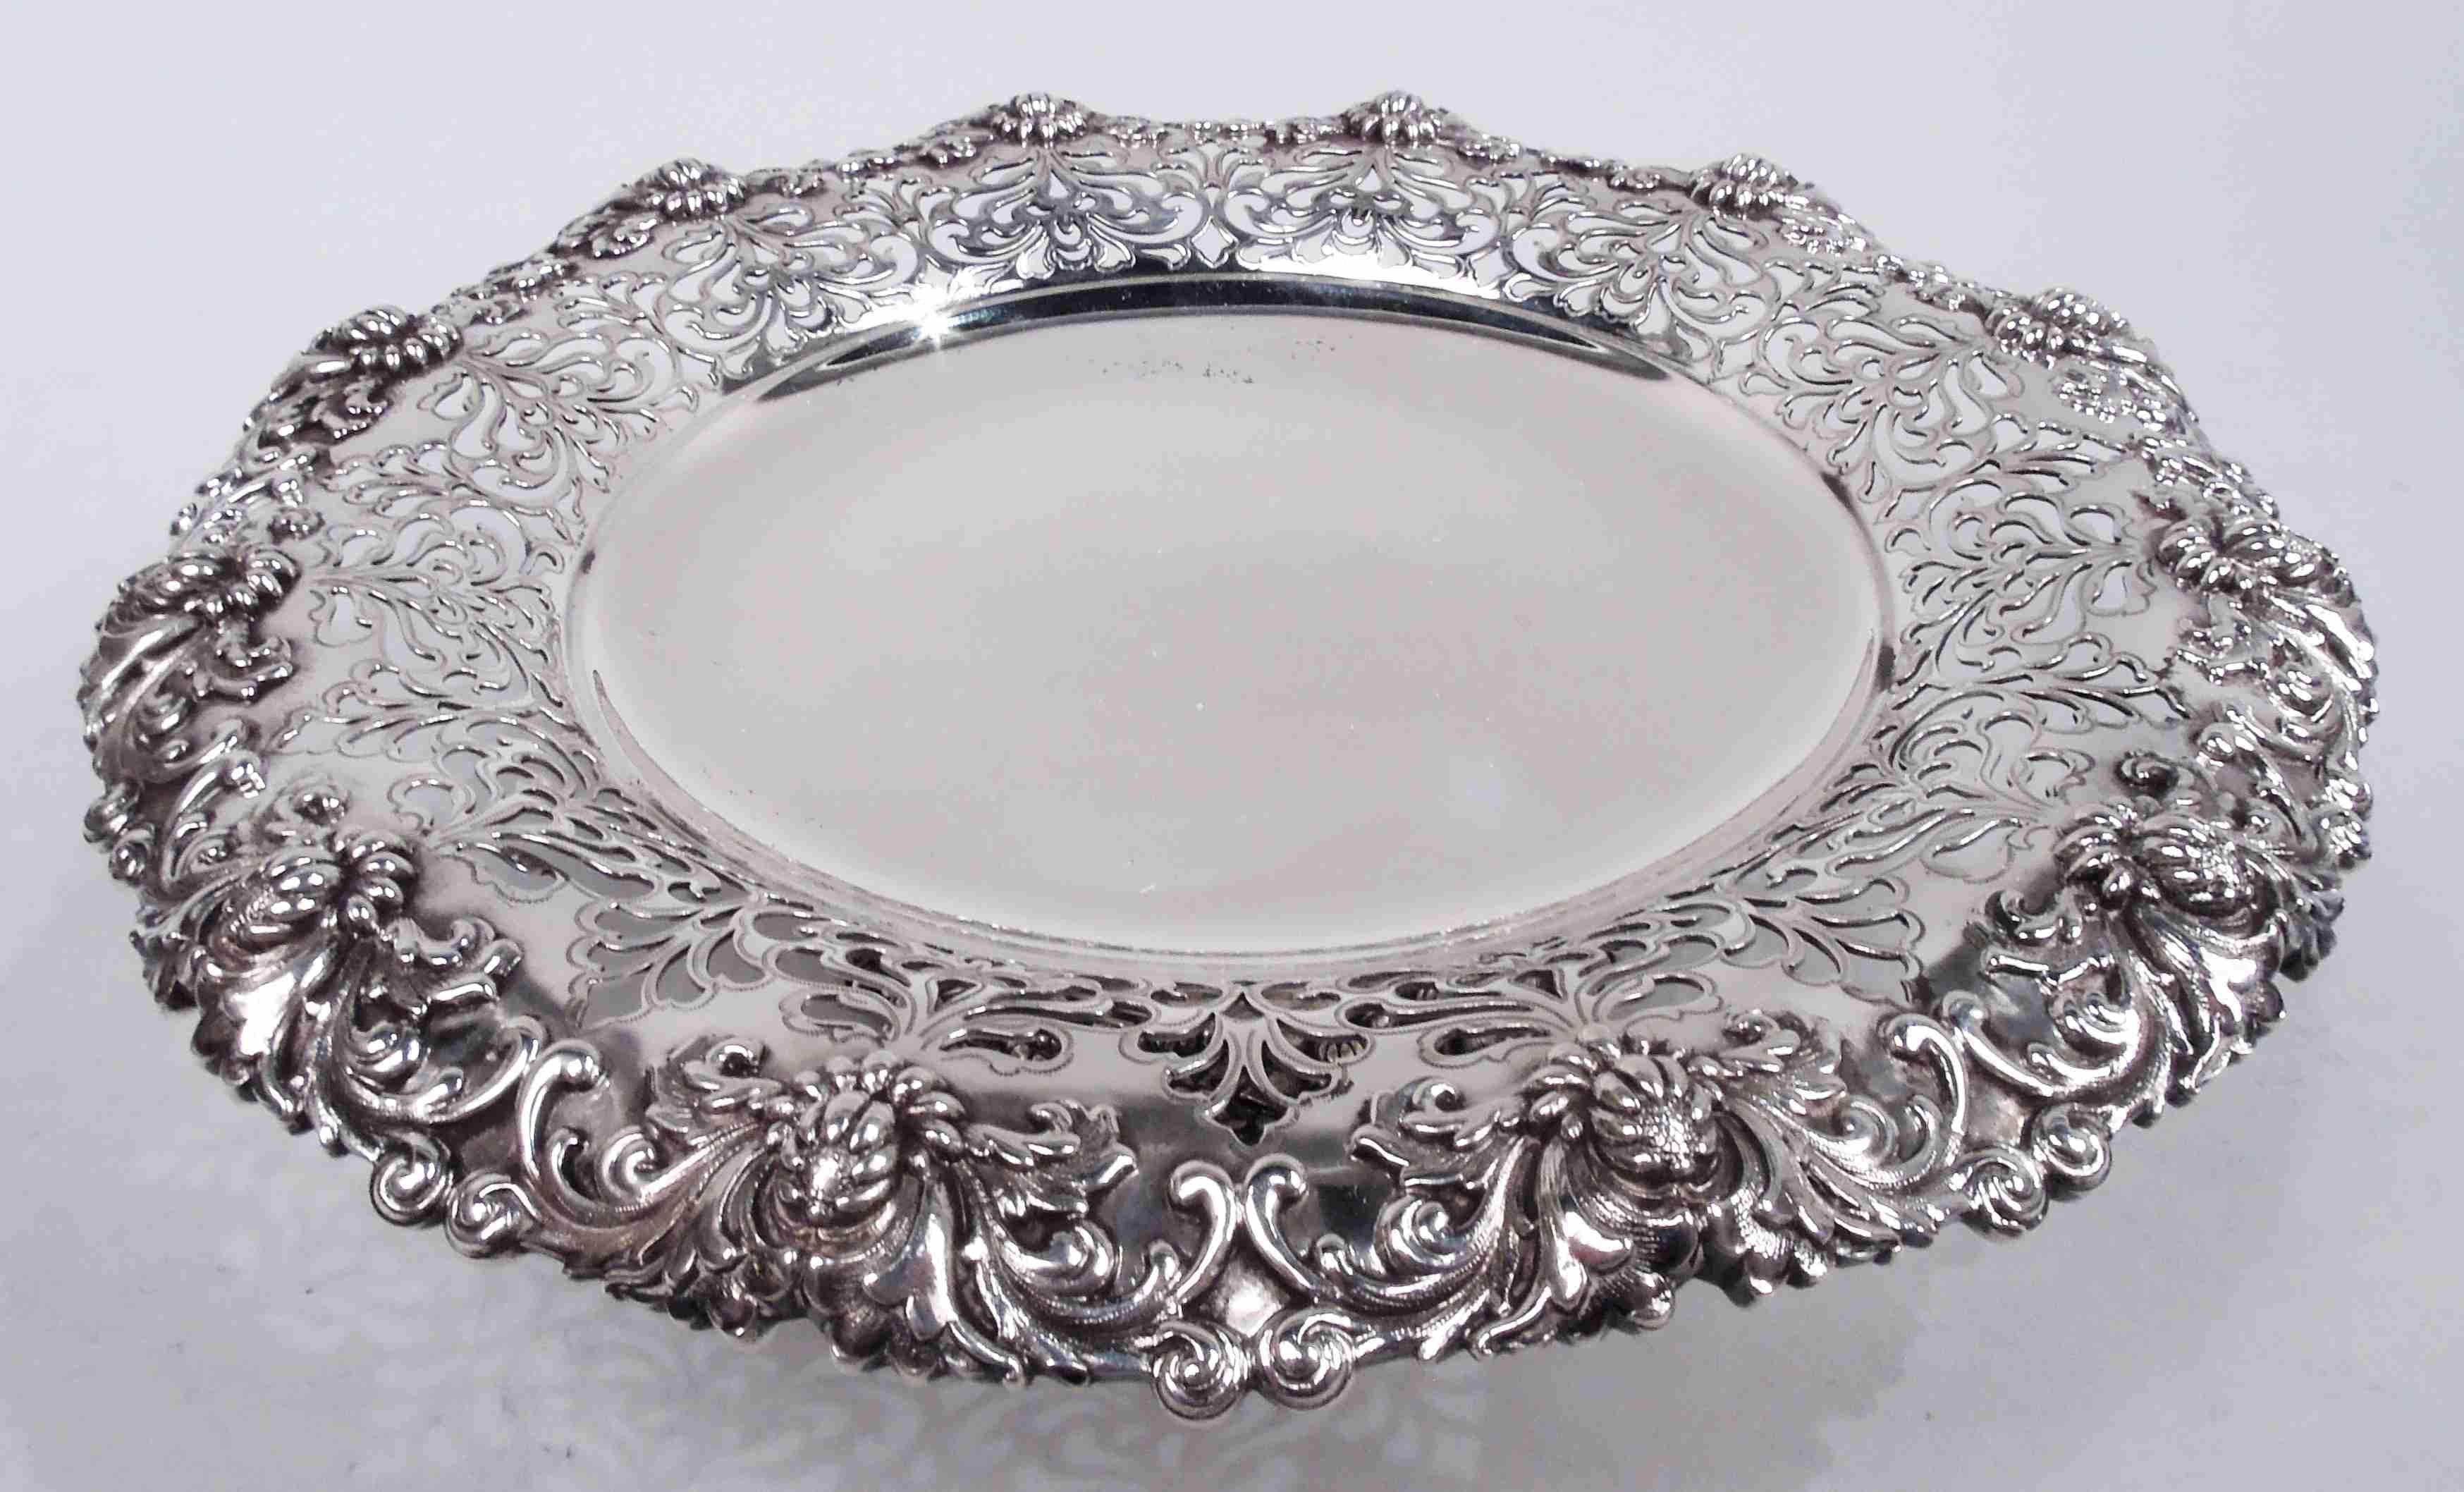 Victorian Classical sterling silver compotes. Made by Tiffany & Co. in New York. Each: Round solid well; sides have pierced leafing scrollwork and turned-down rim applied with cast leafing scrollwork and buds that suggest the influence of